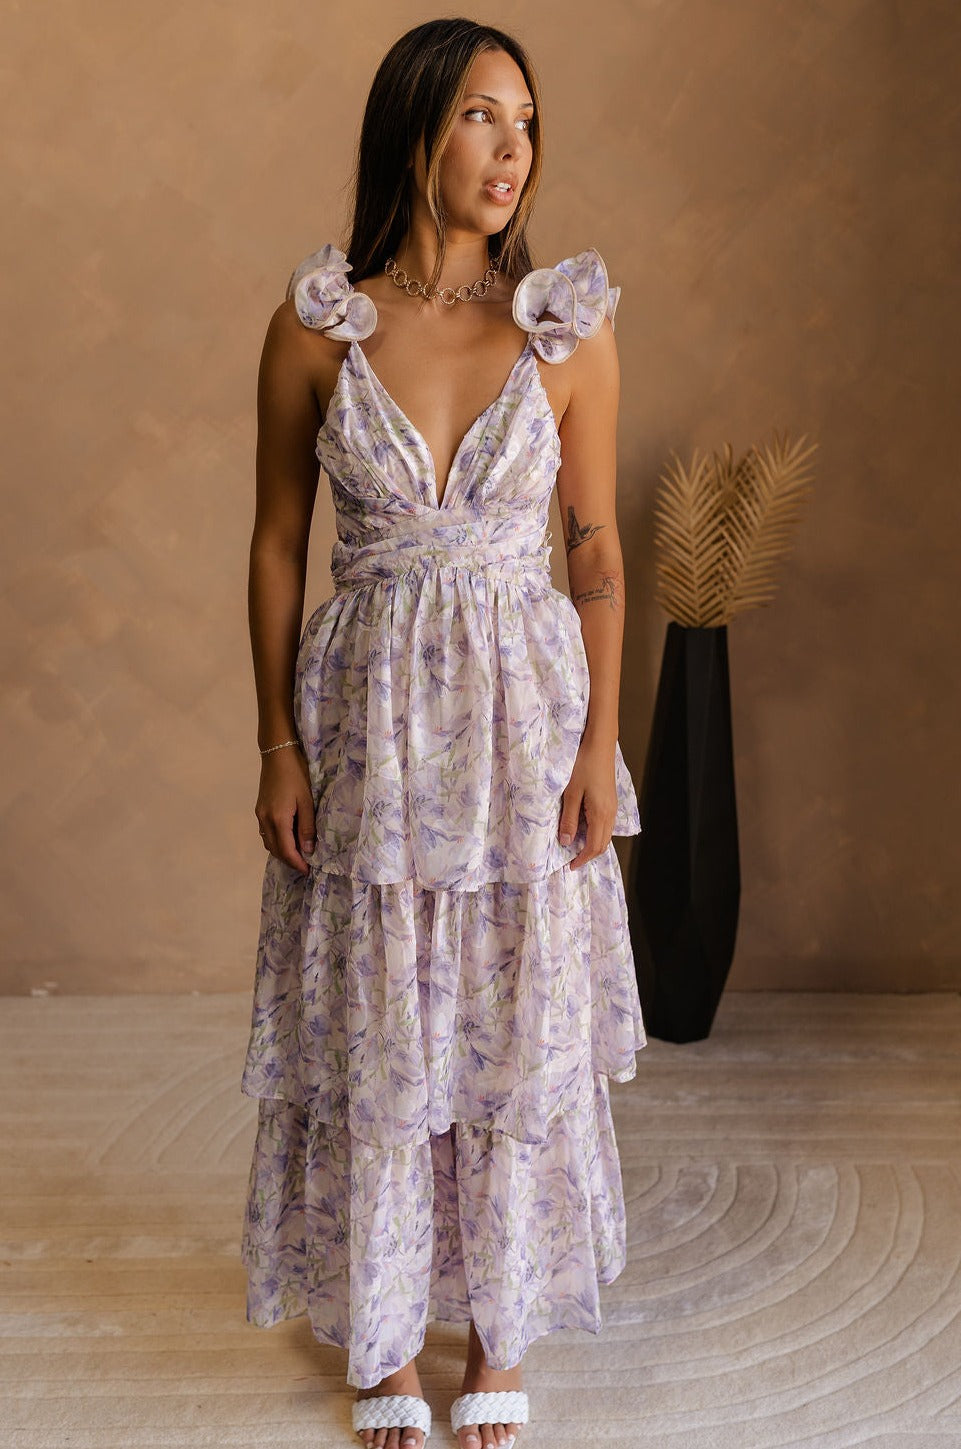 full body view of model wearing The Harlow Lavender Floral Ruffle Midi Dress features sheer fabric with purple, green, orange floral print, shimmer thread details, beige lining, a tiered body with a maxi-length hem, ruffled straps, a plunge neckline, a lace-up back, and a back zipper and hook closure.